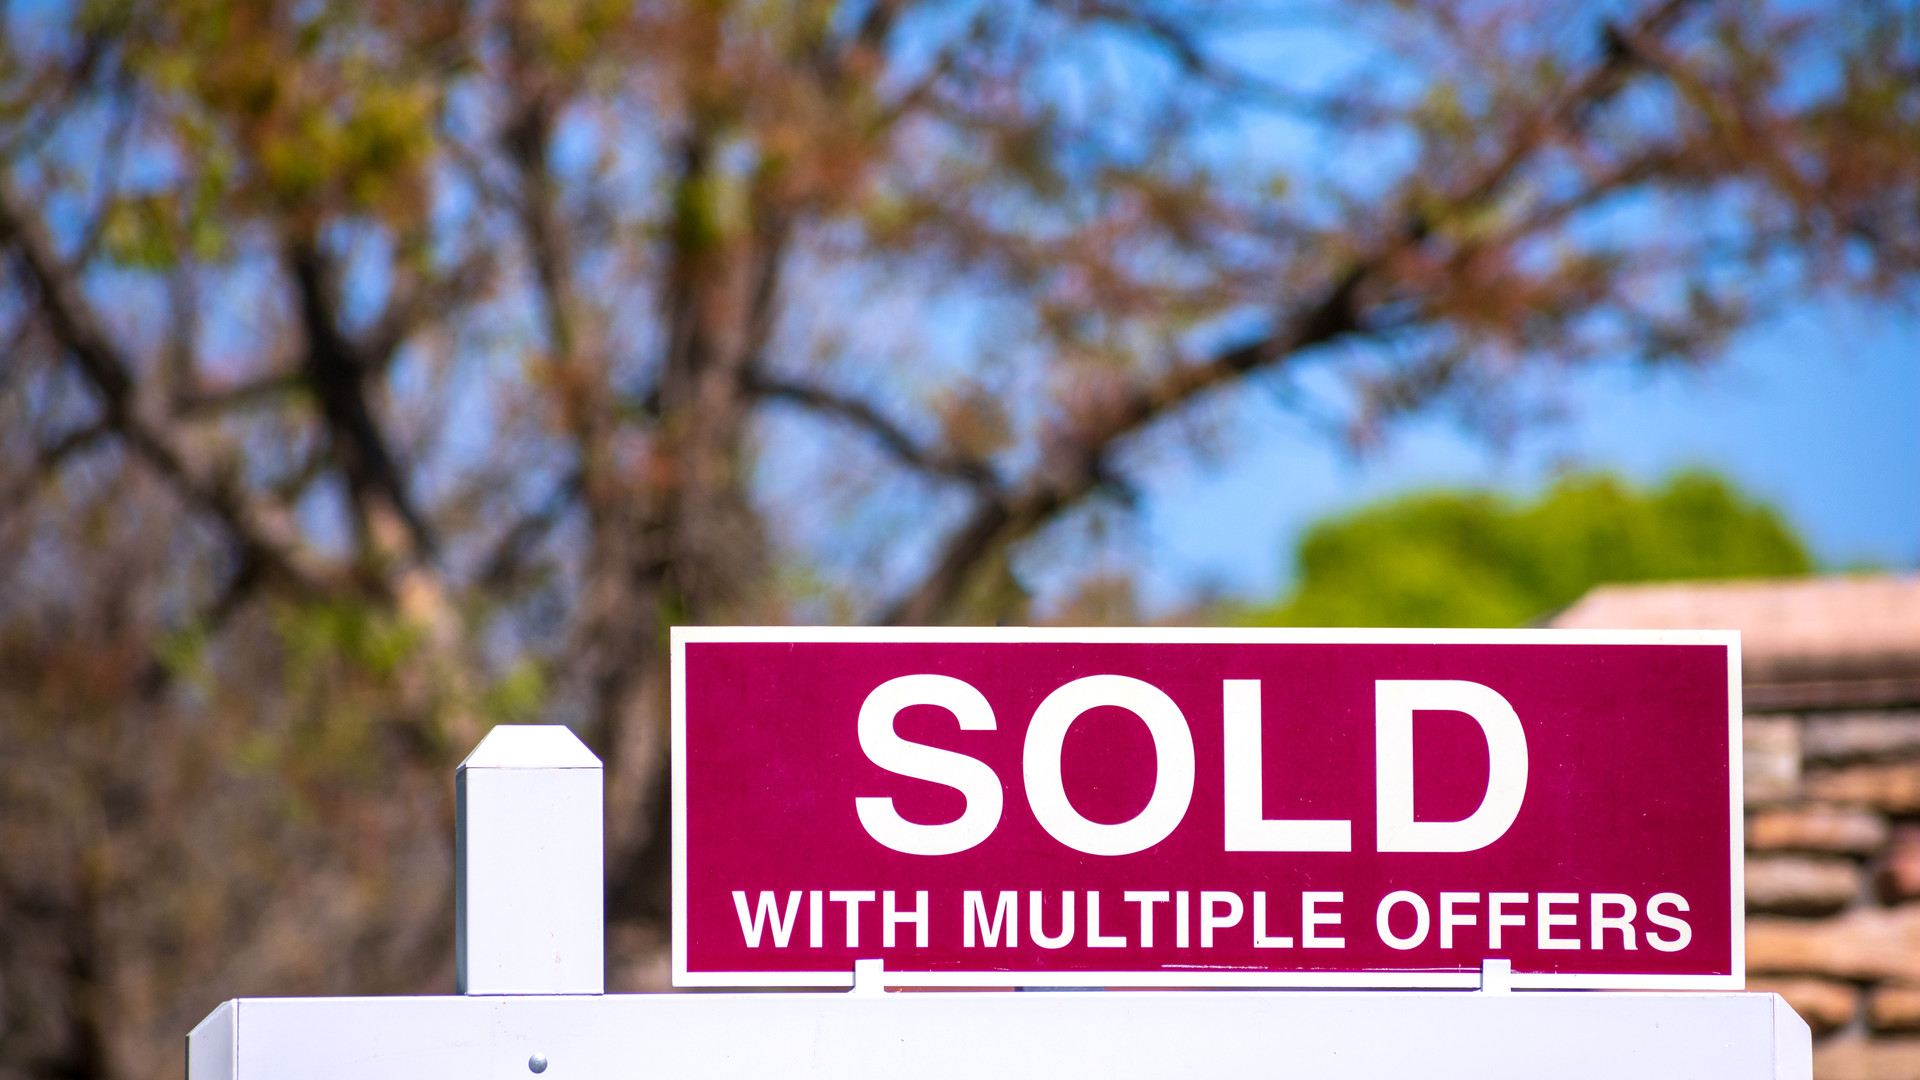 SOLD With Multiple Offers real estate sign near purchased house.